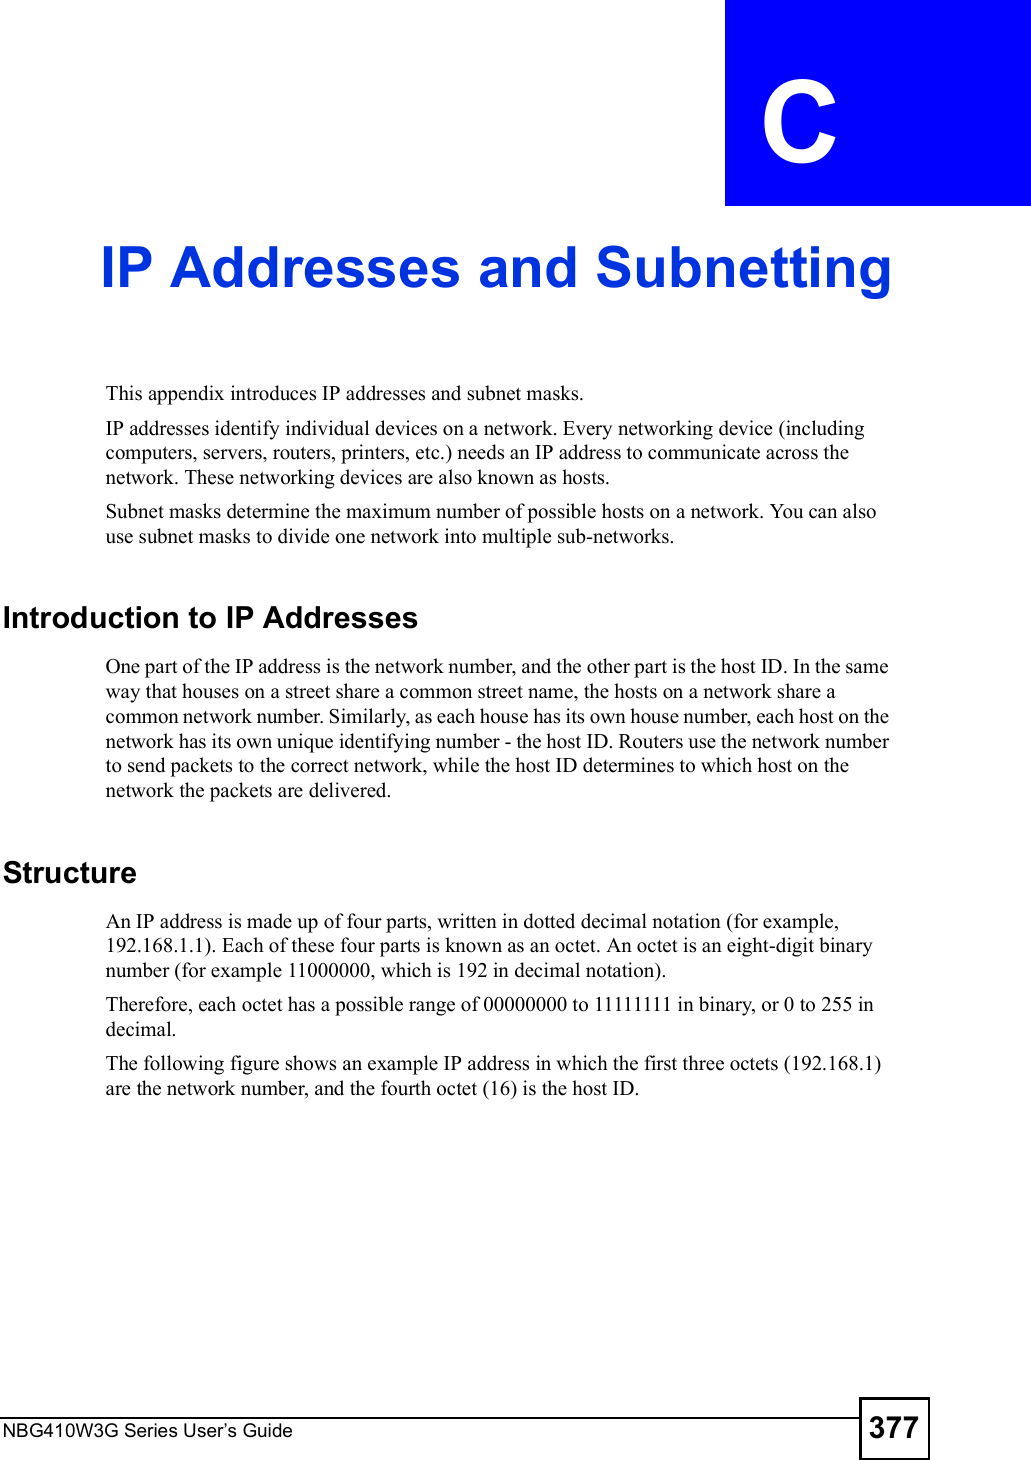 NBG410W3G Series User s Guide 377APPENDIX  C IP Addresses and SubnettingThis appendix introduces IP addresses and subnet masks. IP addresses identify individual devices on a network. Every networking device (including computers, servers, routers, printers, etc.) needs an IP address to communicate across the network. These networking devices are also known as hosts.Subnet masks determine the maximum number of possible hosts on a network. You can also use subnet masks to divide one network into multiple sub-networks.Introduction to IP AddressesOne part of the IP address is the network number, and the other part is the host ID. In the same way that houses on a street share a common street name, the hosts on a network share a common network number. Similarly, as each house has its own house number, each host on the network has its own unique identifying number - the host ID. Routers use the network number to send packets to the correct network, while the host ID determines to which host on the network the packets are delivered.StructureAn IP address is made up of four parts, written in dotted decimal notation (for example, 192.168.1.1). Each of these four parts is known as an octet. An octet is an eight-digit binary number (for example 11000000, which is 192 in decimal notation). Therefore, each octet has a possible range of 00000000 to 11111111 in binary, or 0 to 255 in decimal.The following figure shows an example IP address in which the first three octets (192.168.1) are the network number, and the fourth octet (16) is the host ID.